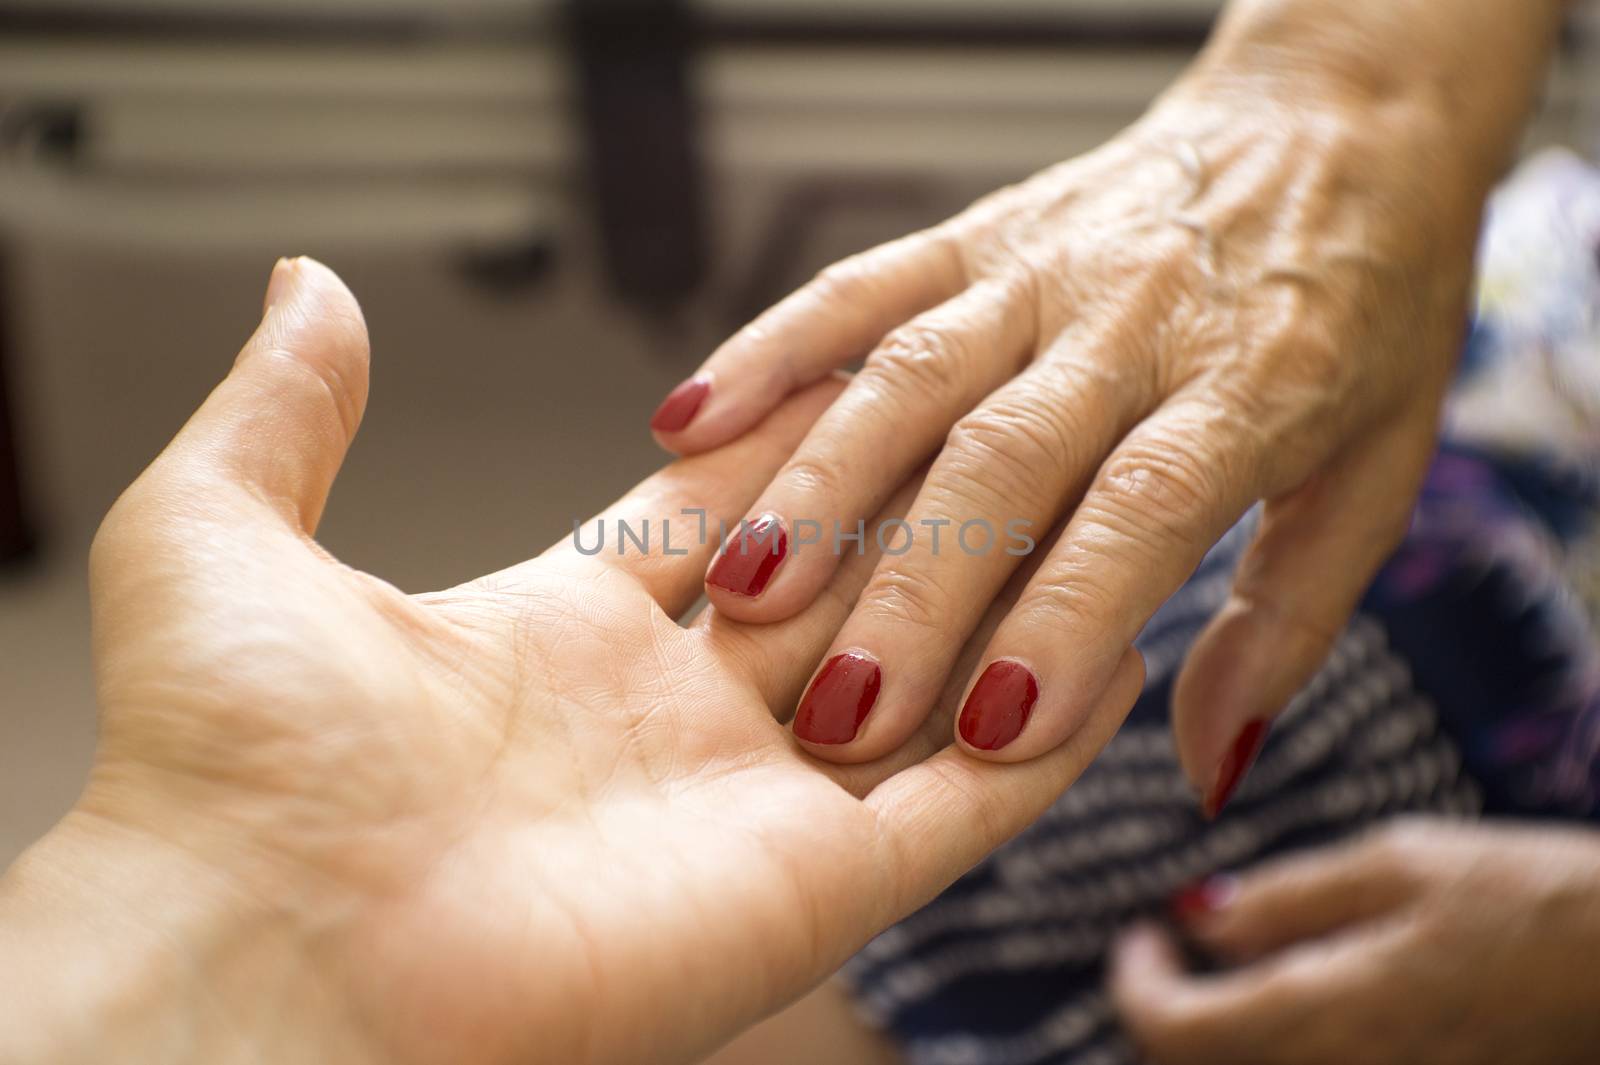 Hands of elderly person with senile dementia by GemaIbarra